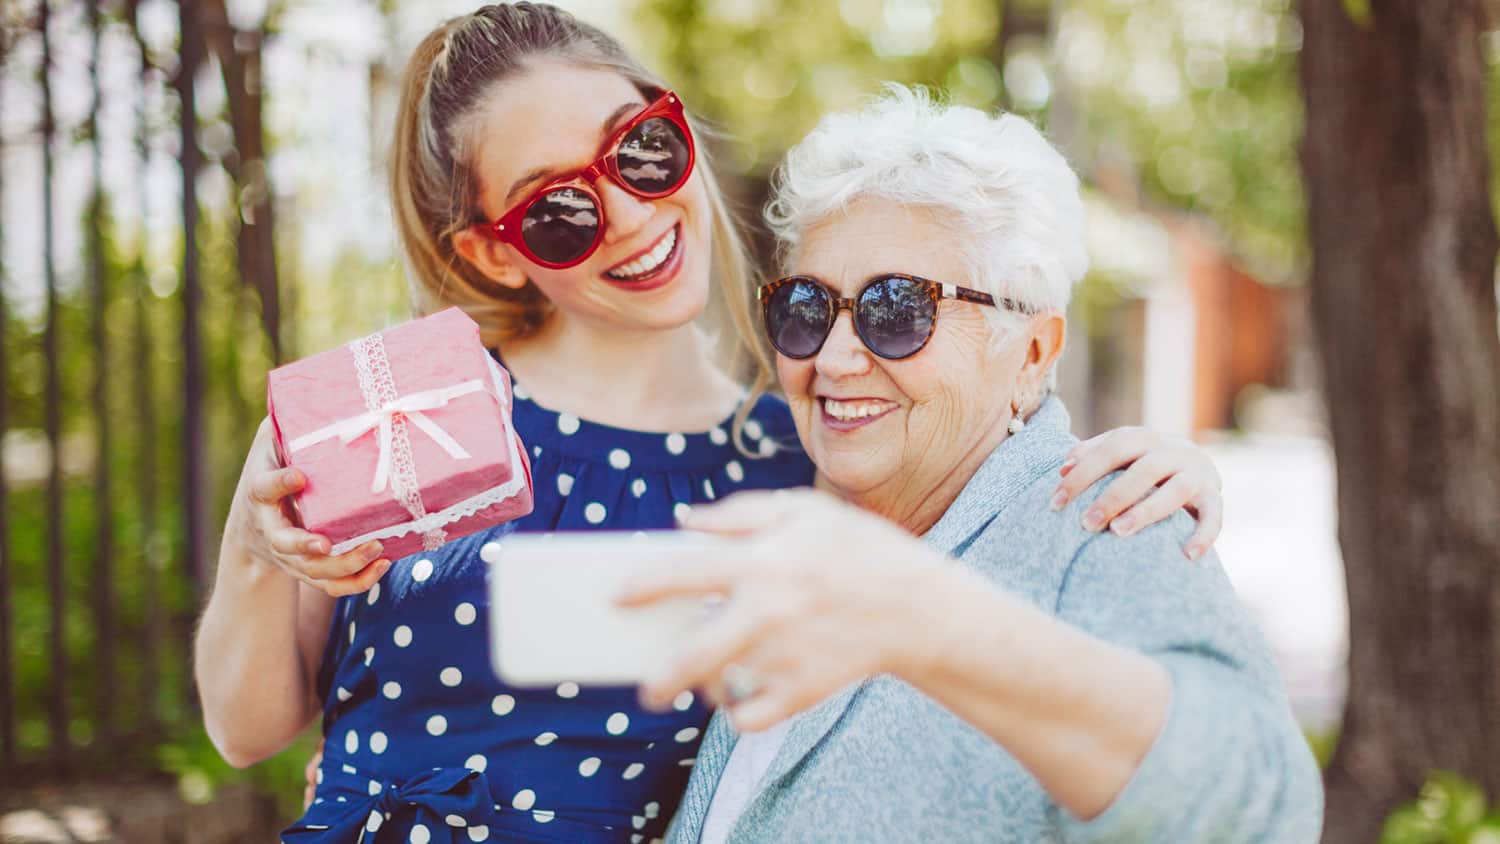 https://cdn.sixtyandme.com/wp-content/uploads/2016/09/Sixty-and-Me_What-Are-the-Best-Gifts-for-Grandma-According-to-Grandmas.jpg